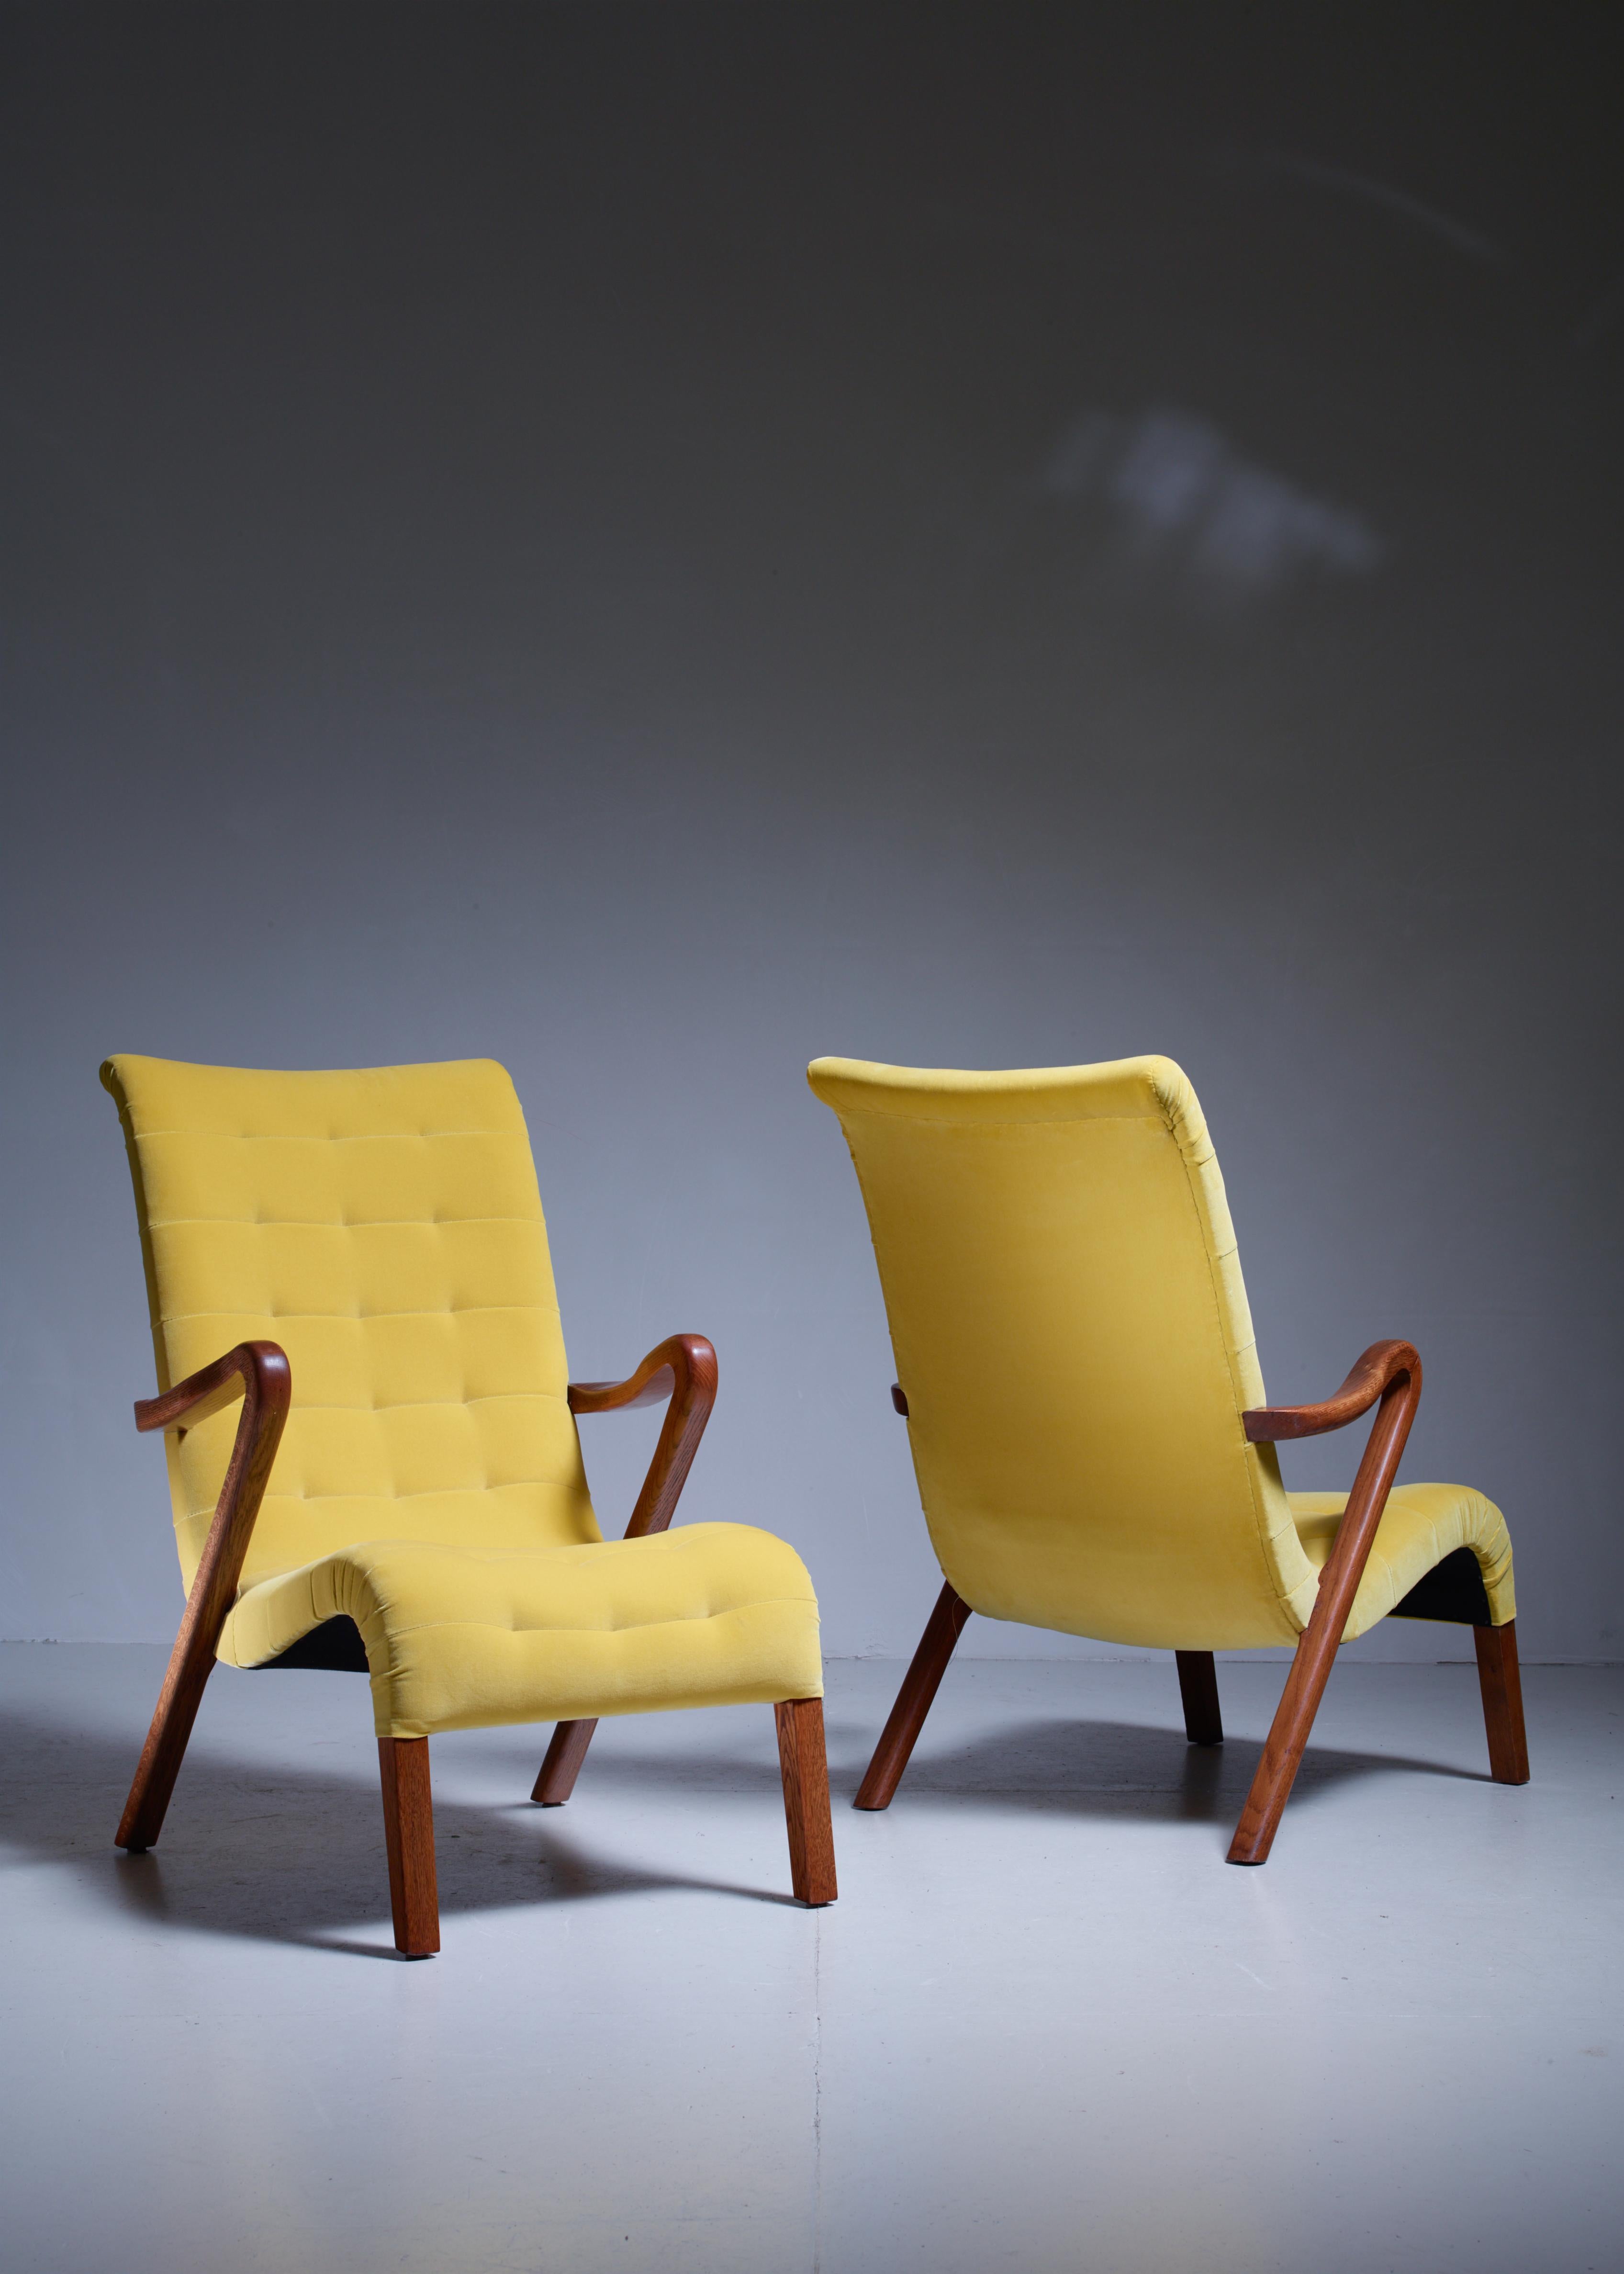 Scandinavian Modern Axel Larsson Pair of Lounge Chairs, Sweden, 1940s For Sale